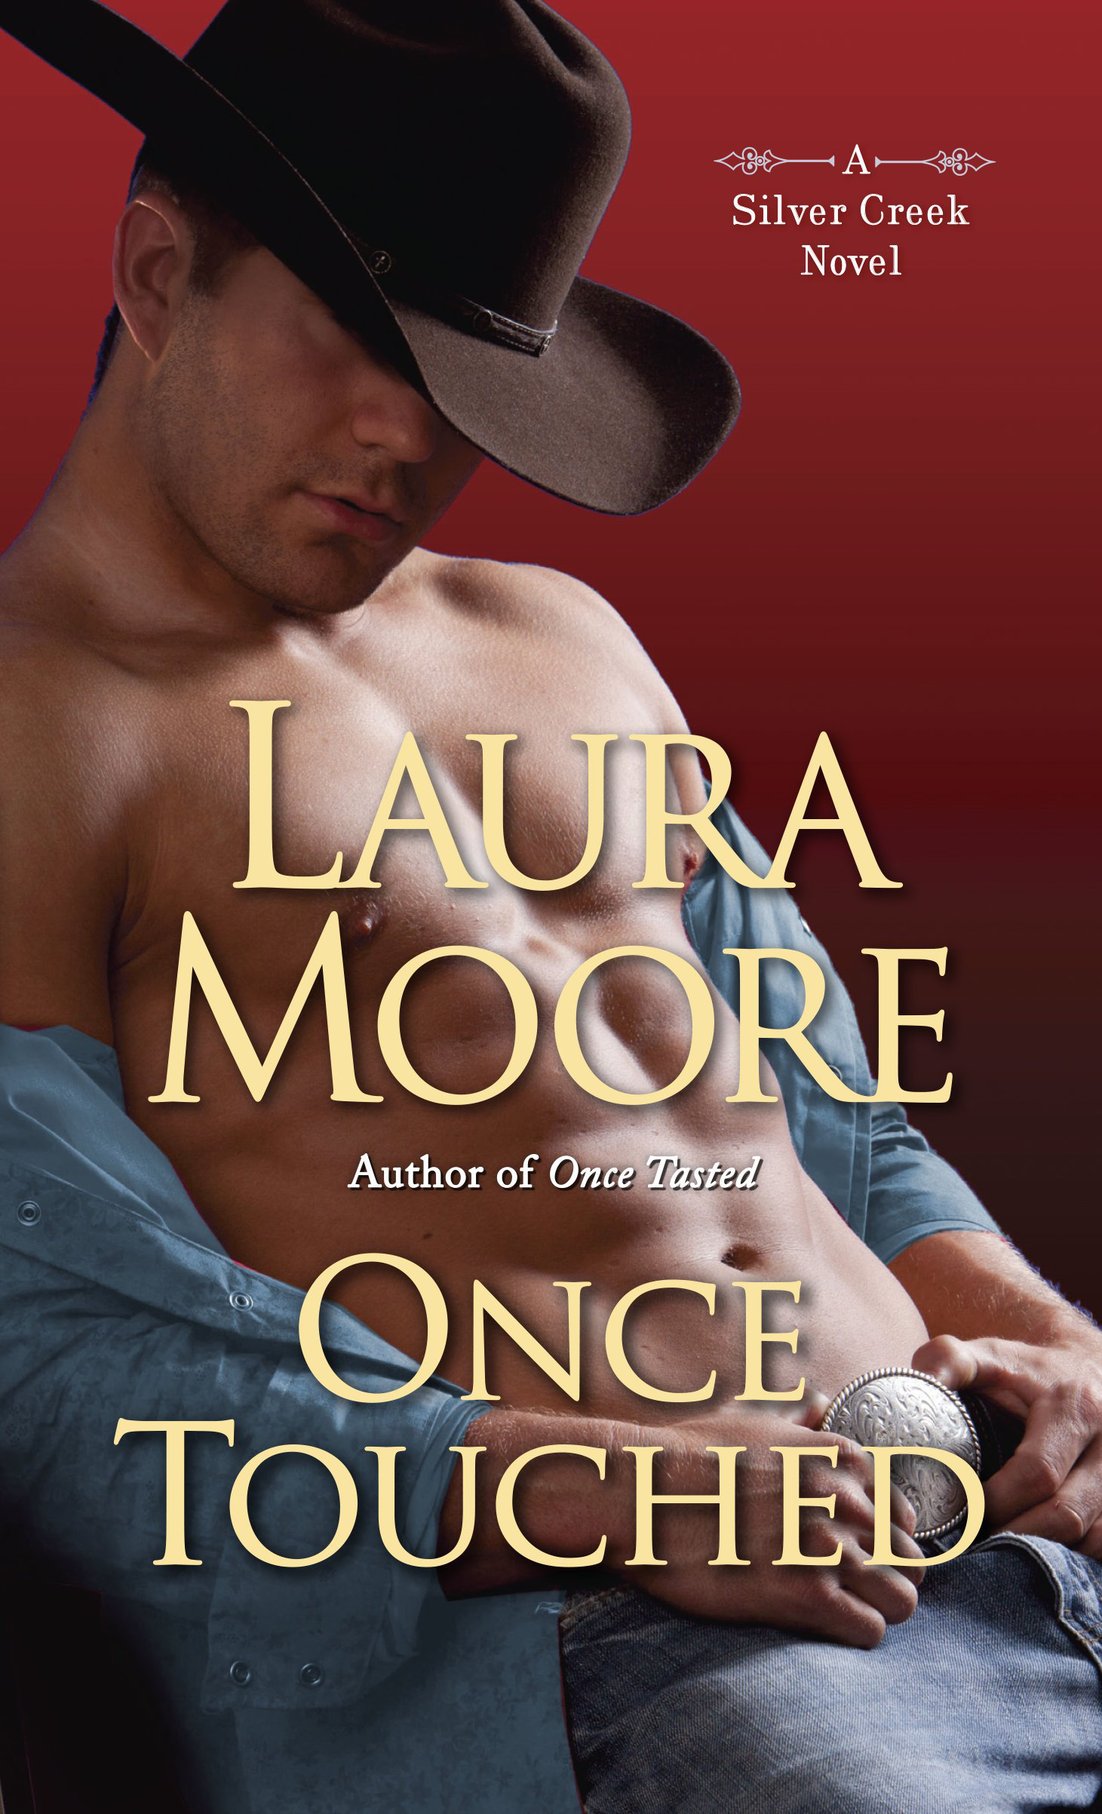 Once Touched (2015) by Laura Moore